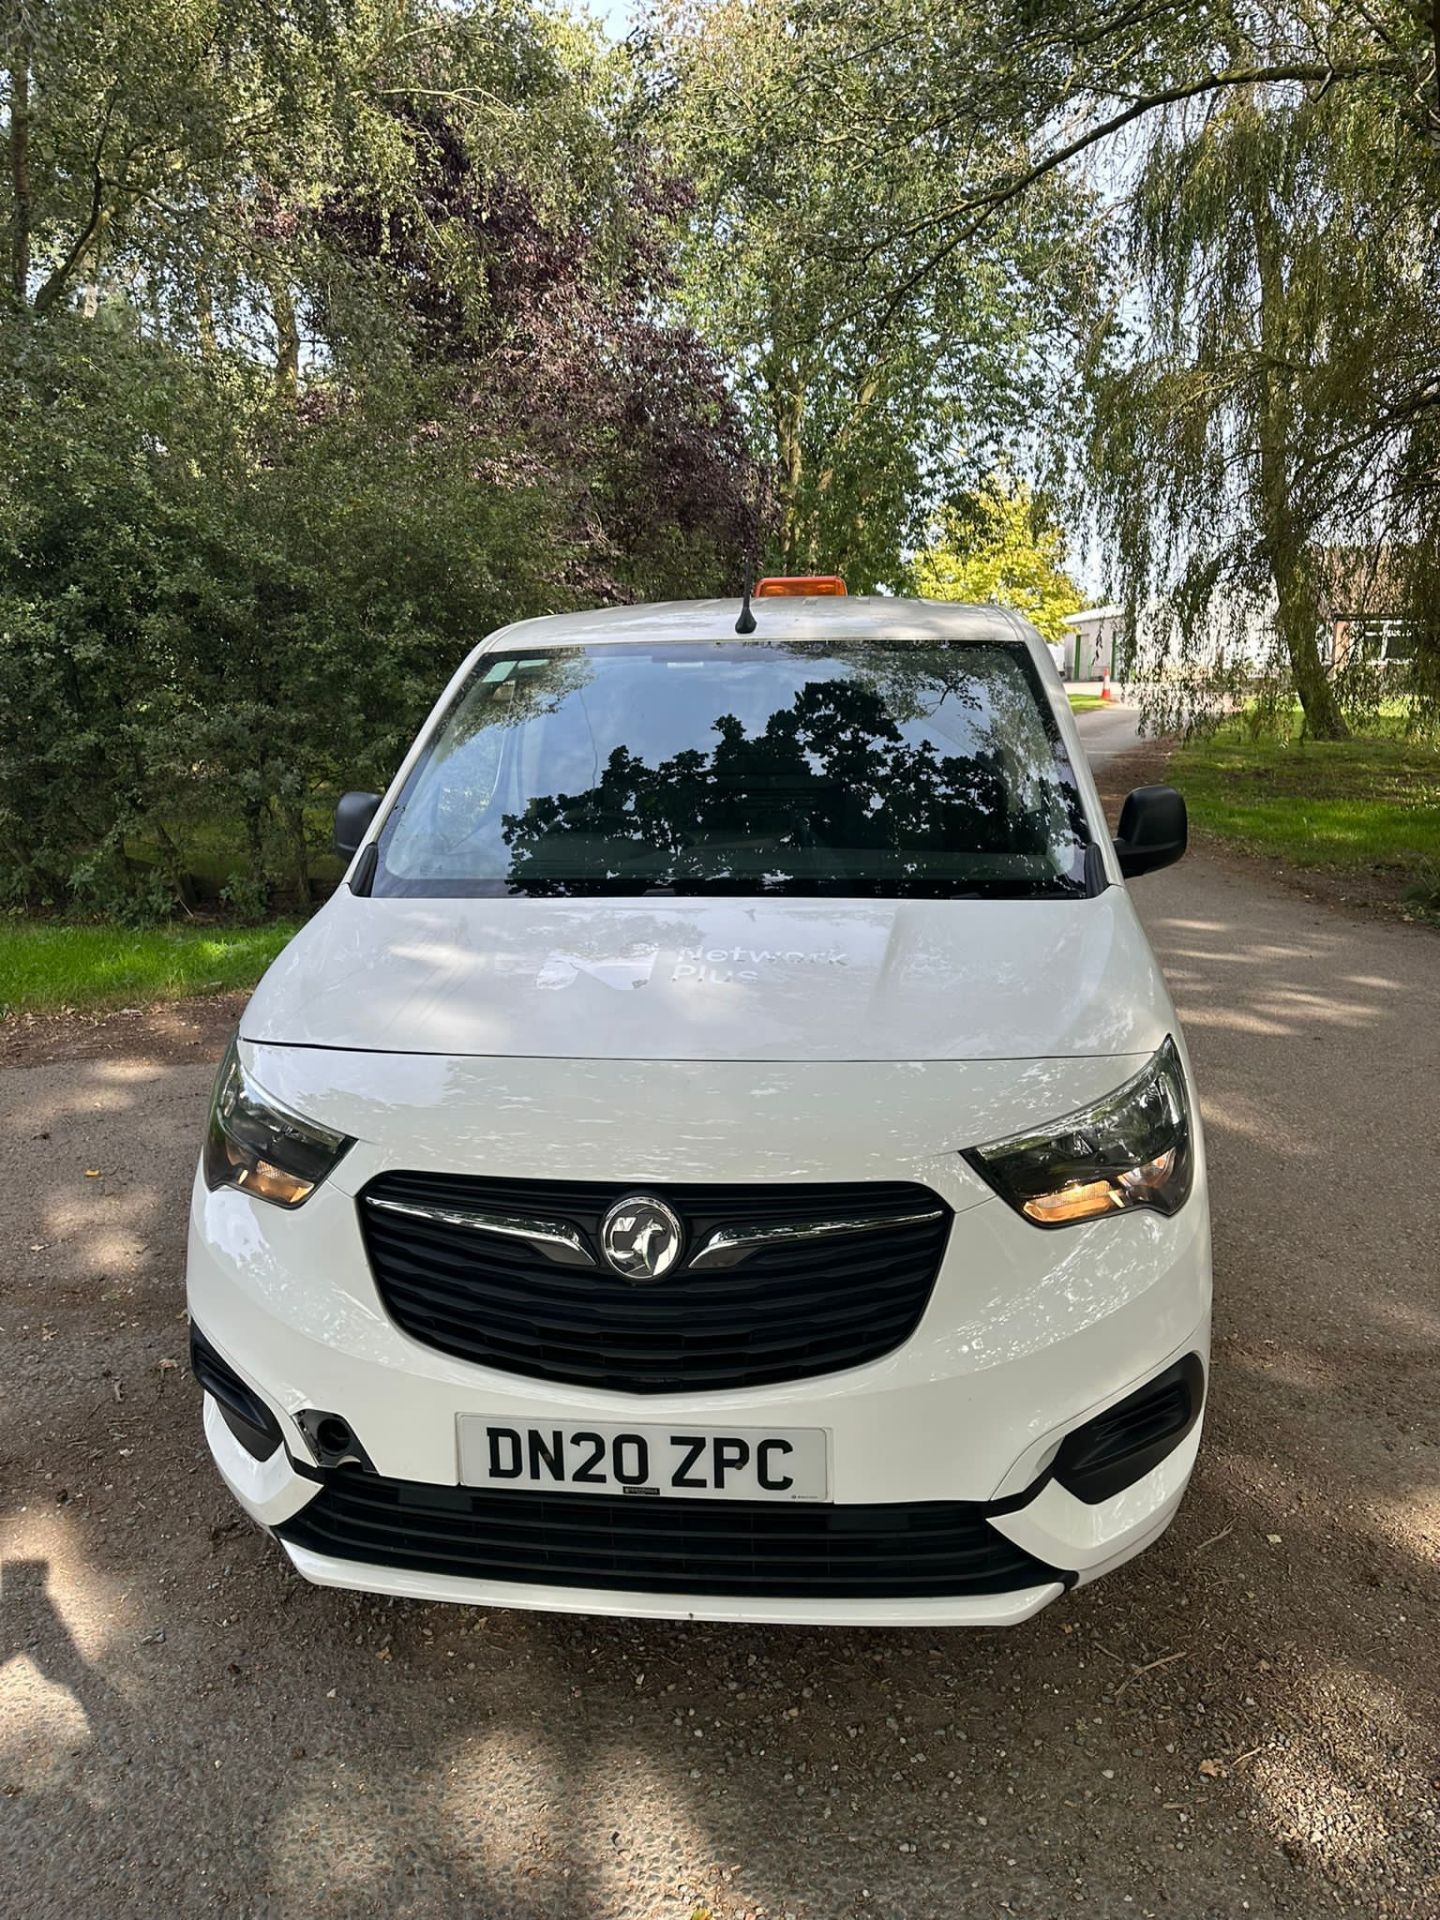 2020 20 Vauxhall combo sportive Panel van - 73k miles - Euro 6 - Lwb - Air con - ply lined - Image 2 of 10